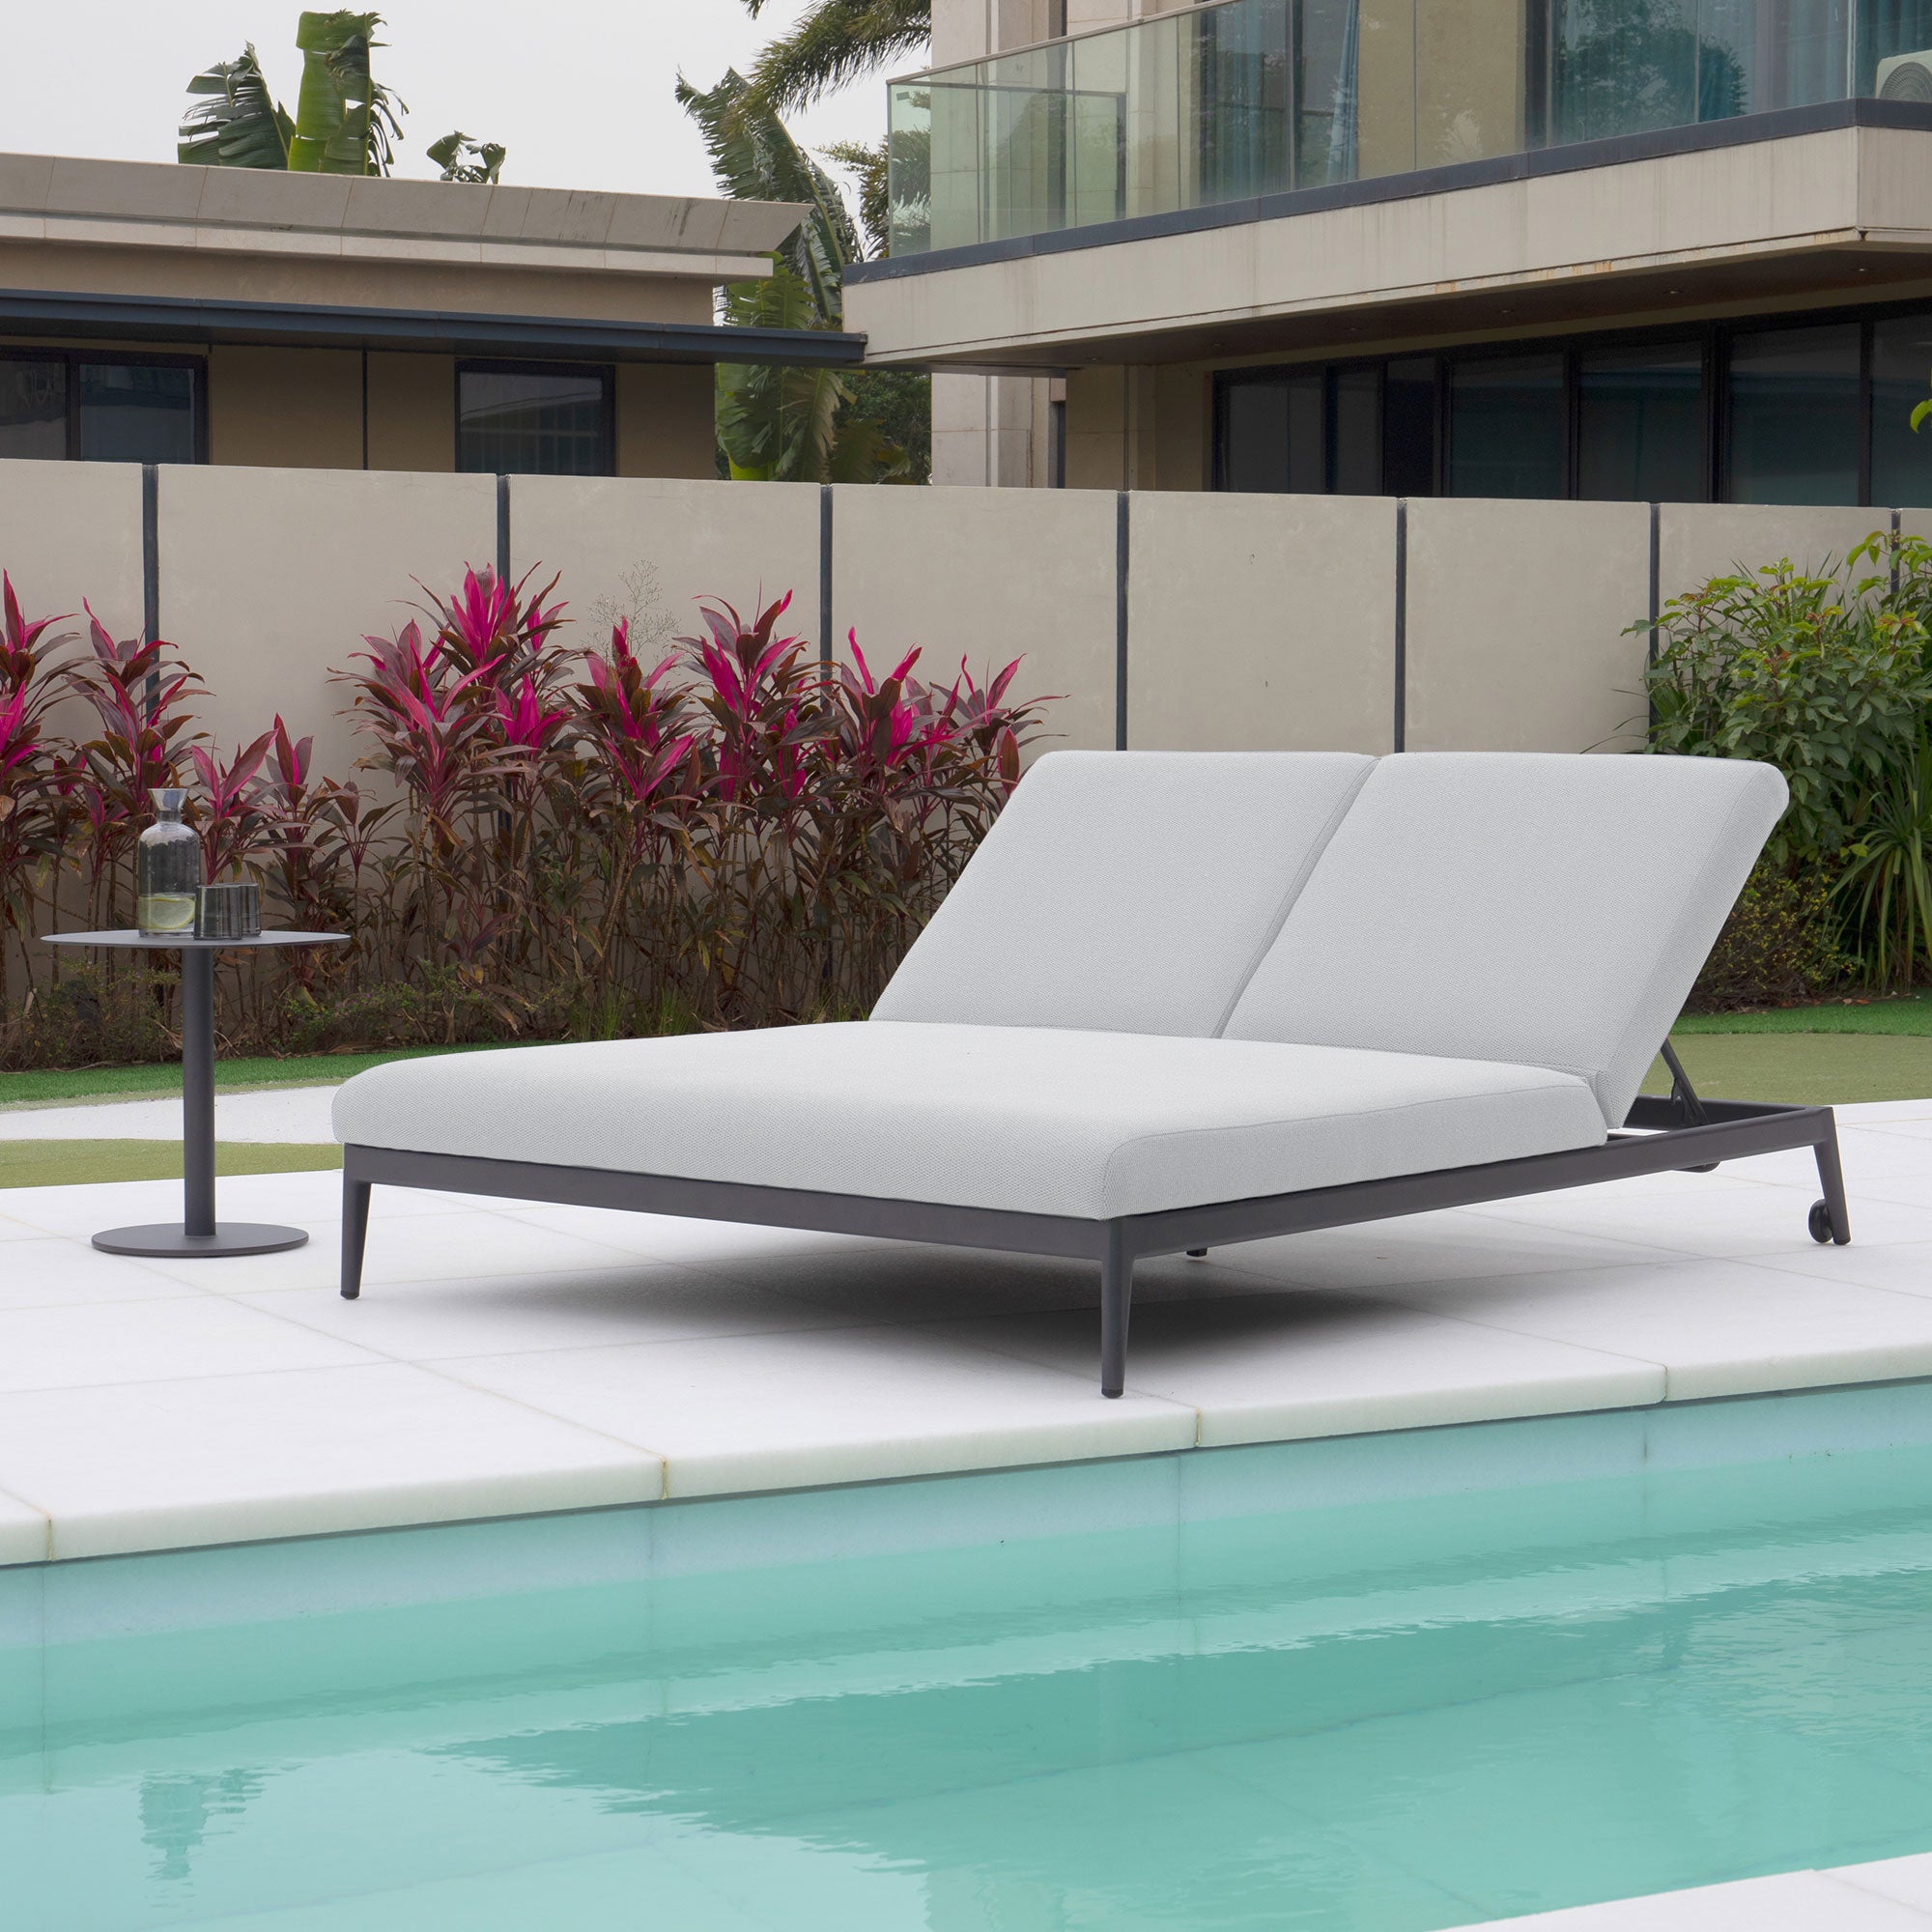 Luna Outdoor Fabric Double Sun Lounger in Oyster Grey